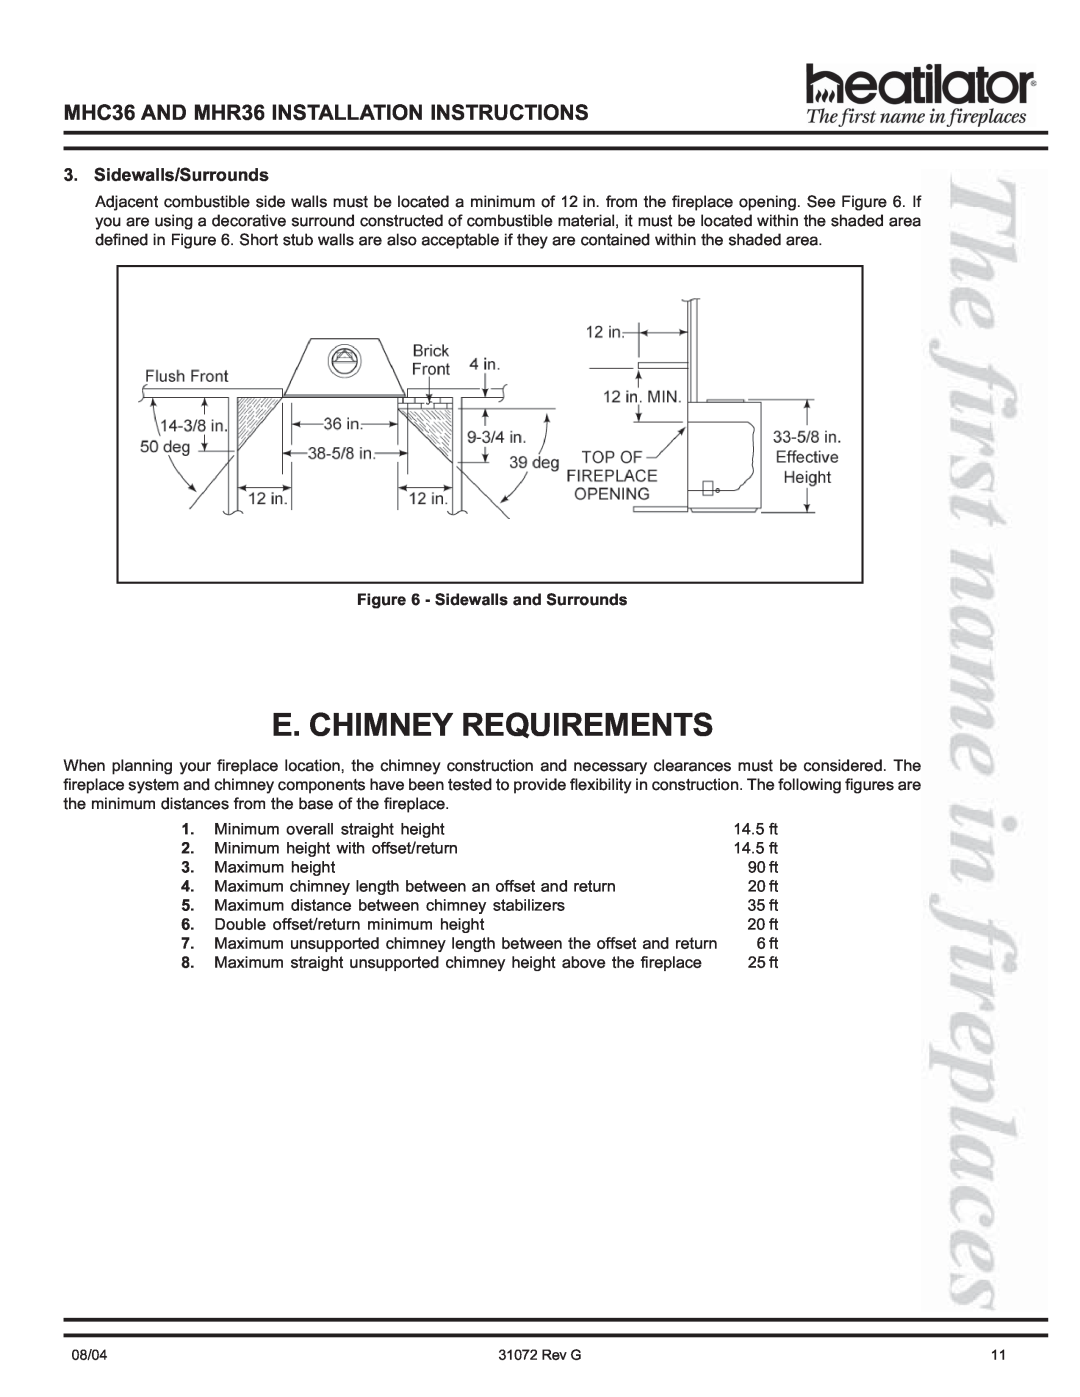 Heart & Home Collectables manual E. Chimney Requirements, Sidewalls/Surrounds, MHC36 AND MHR36 INSTALLATION INSTRUCTIONS 